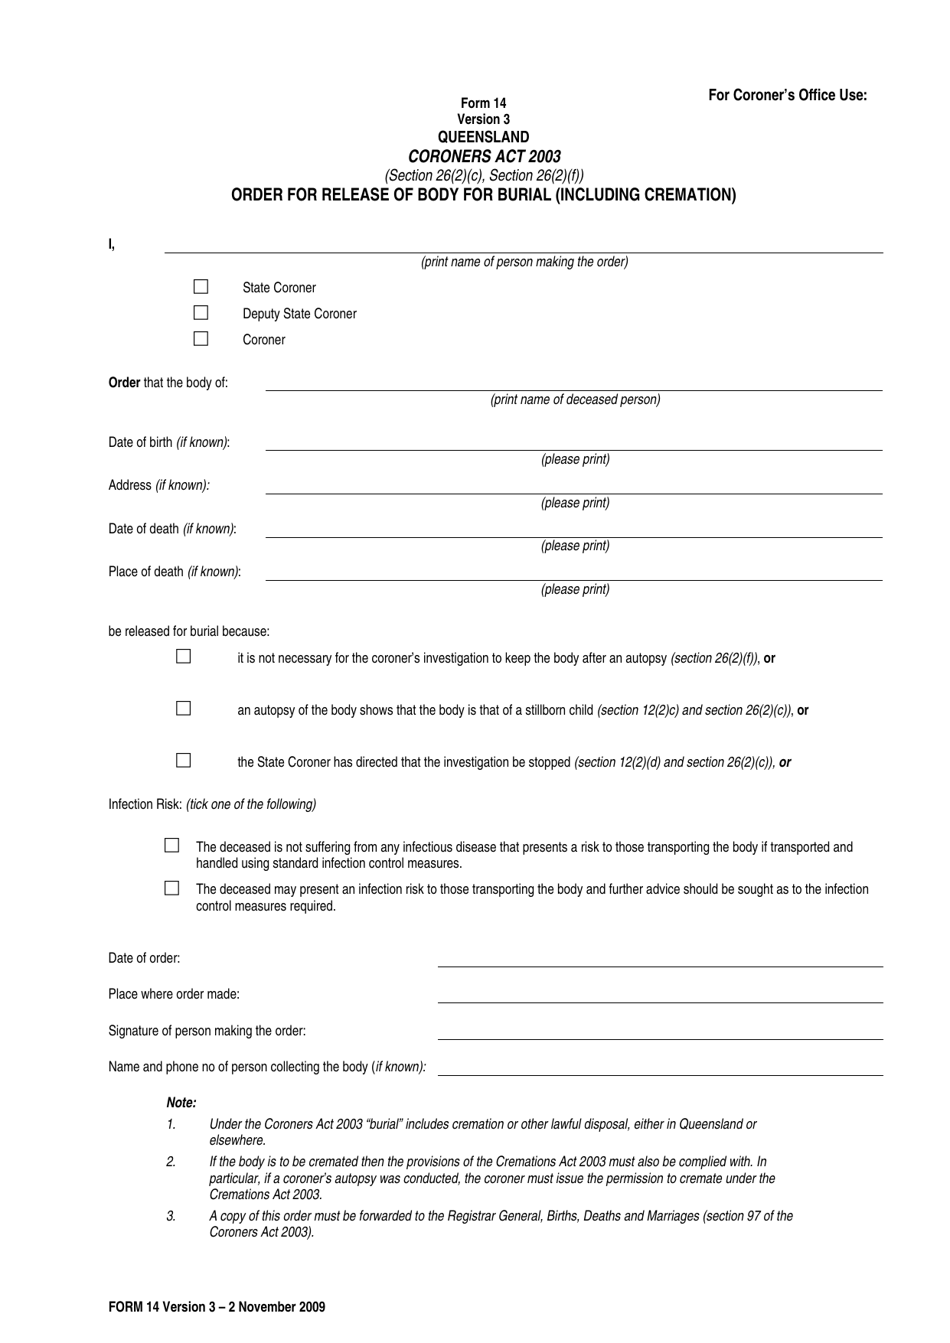 Form 14 Order for Release of Body for Burial (Including Cremation) - Queensland, Australia, Page 1